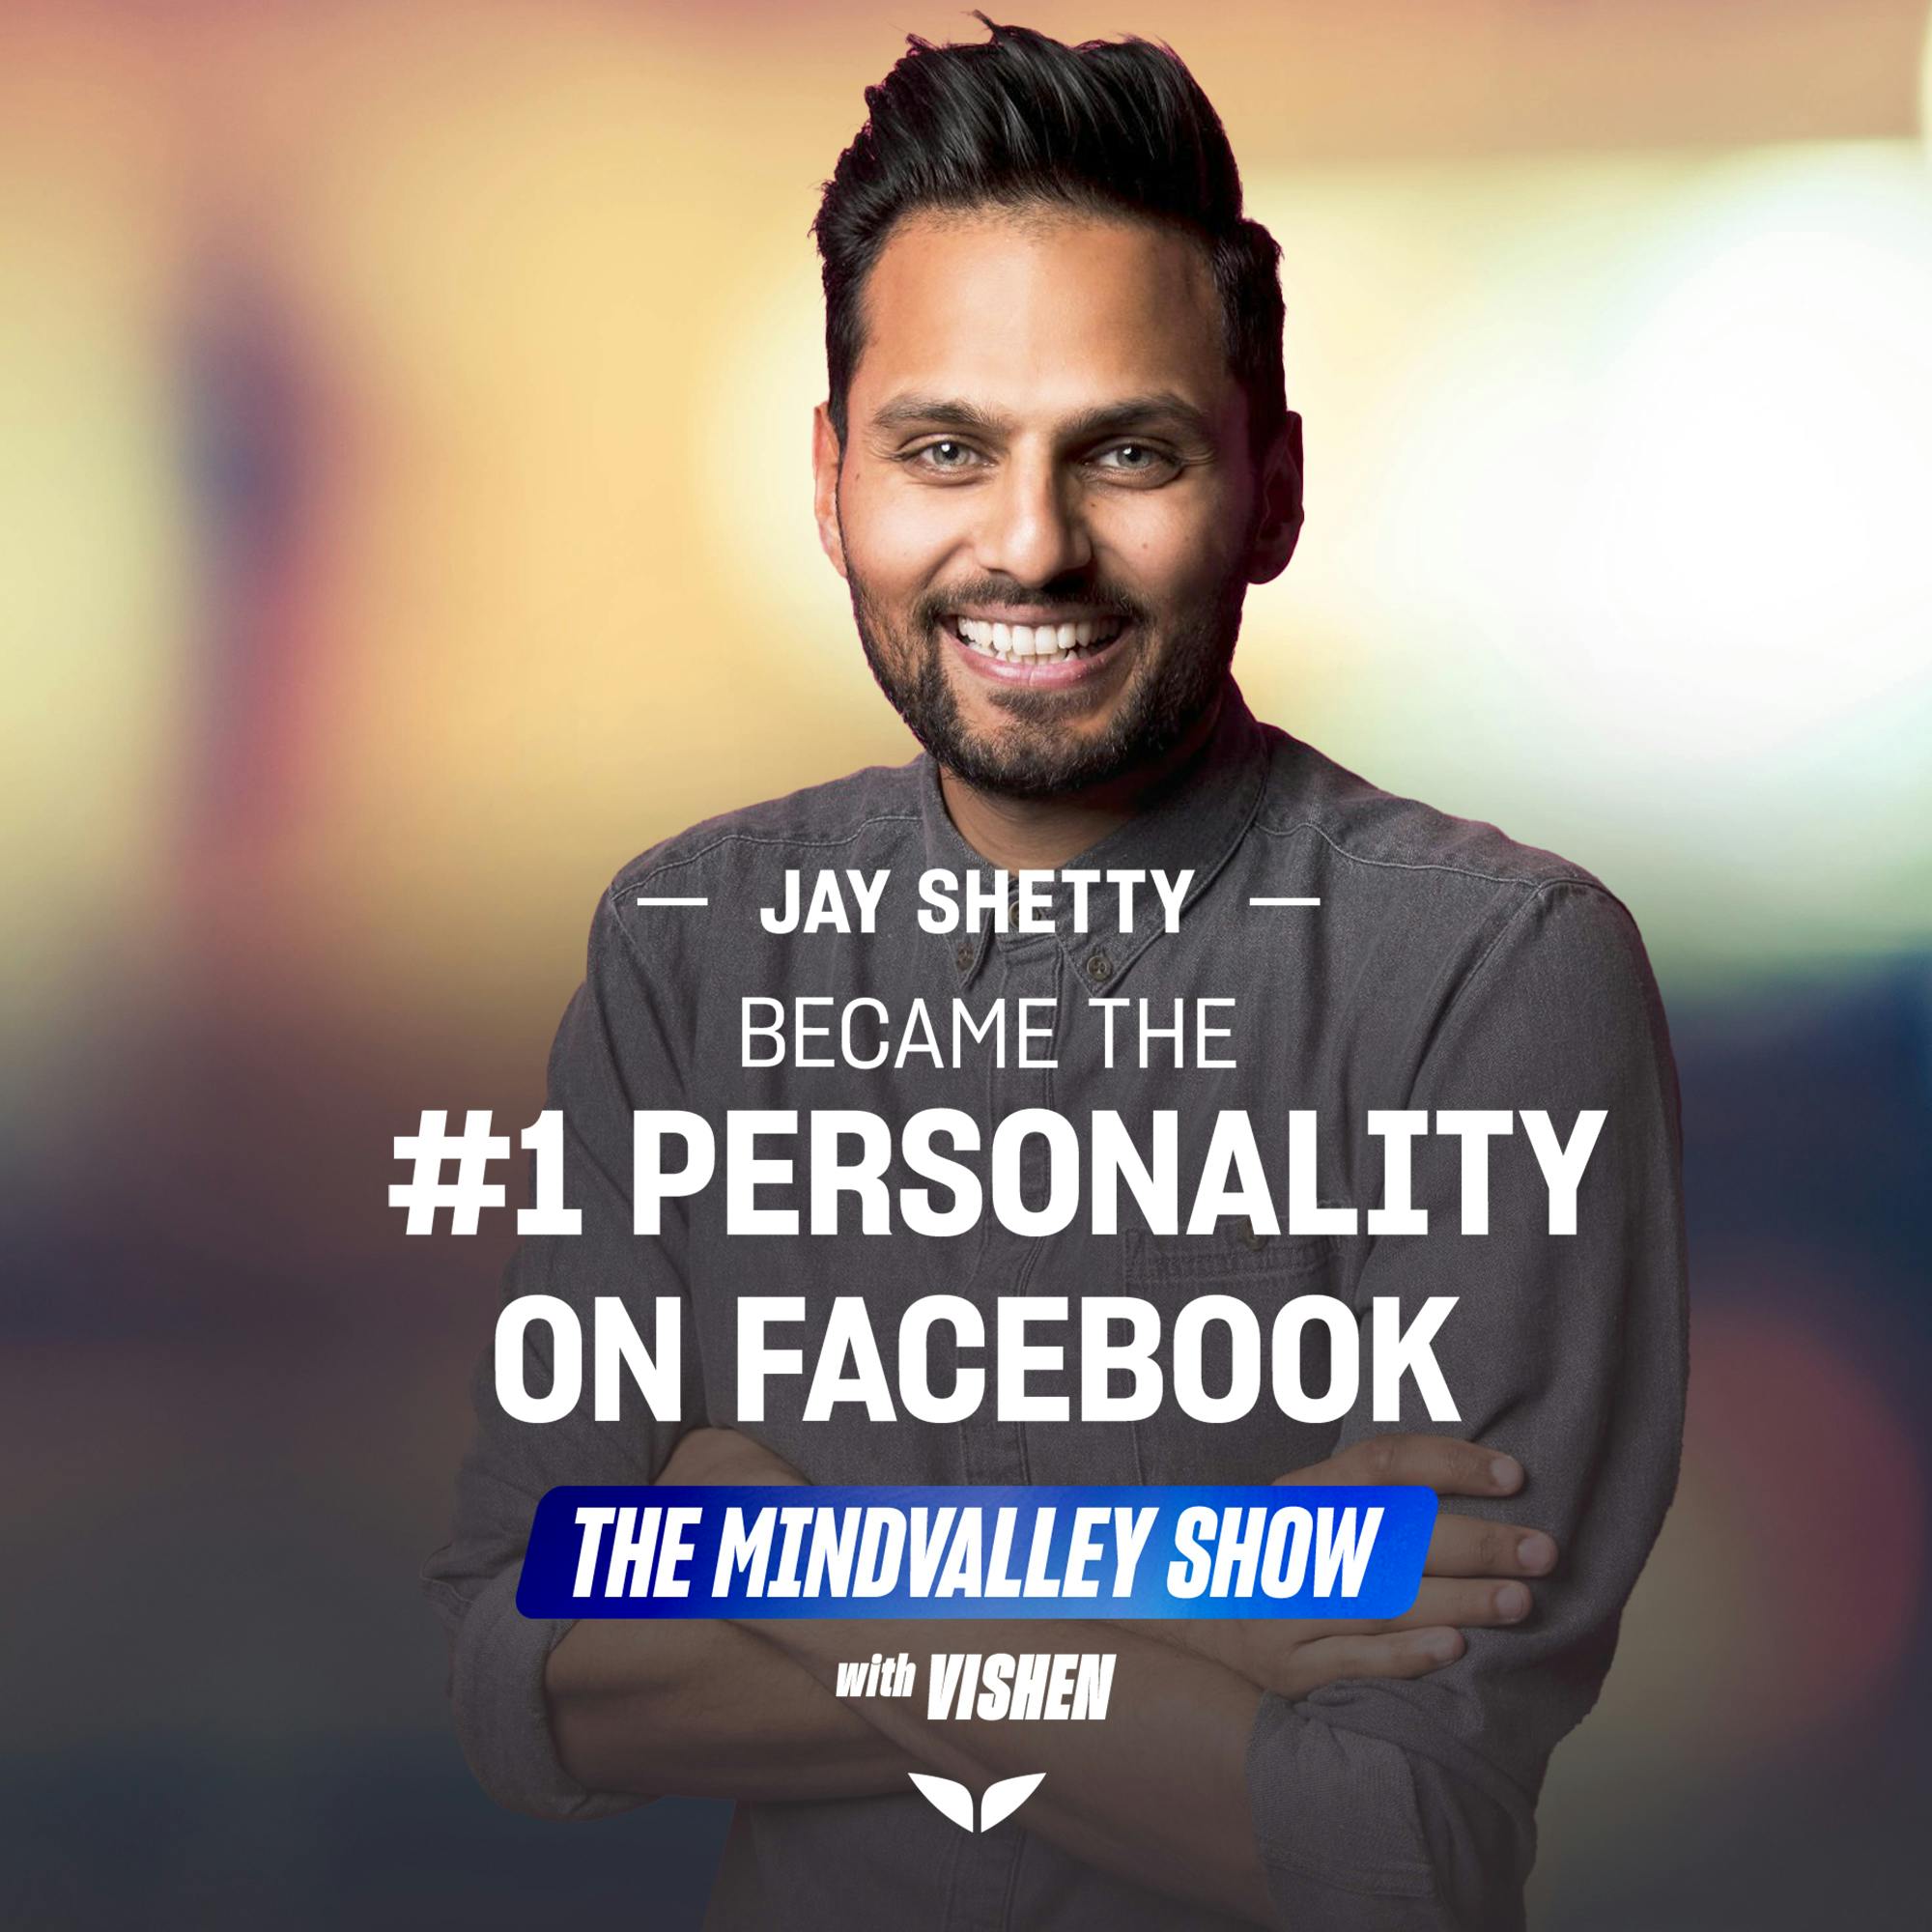 How Jay Shetty Became the #1 Personality on Facebook